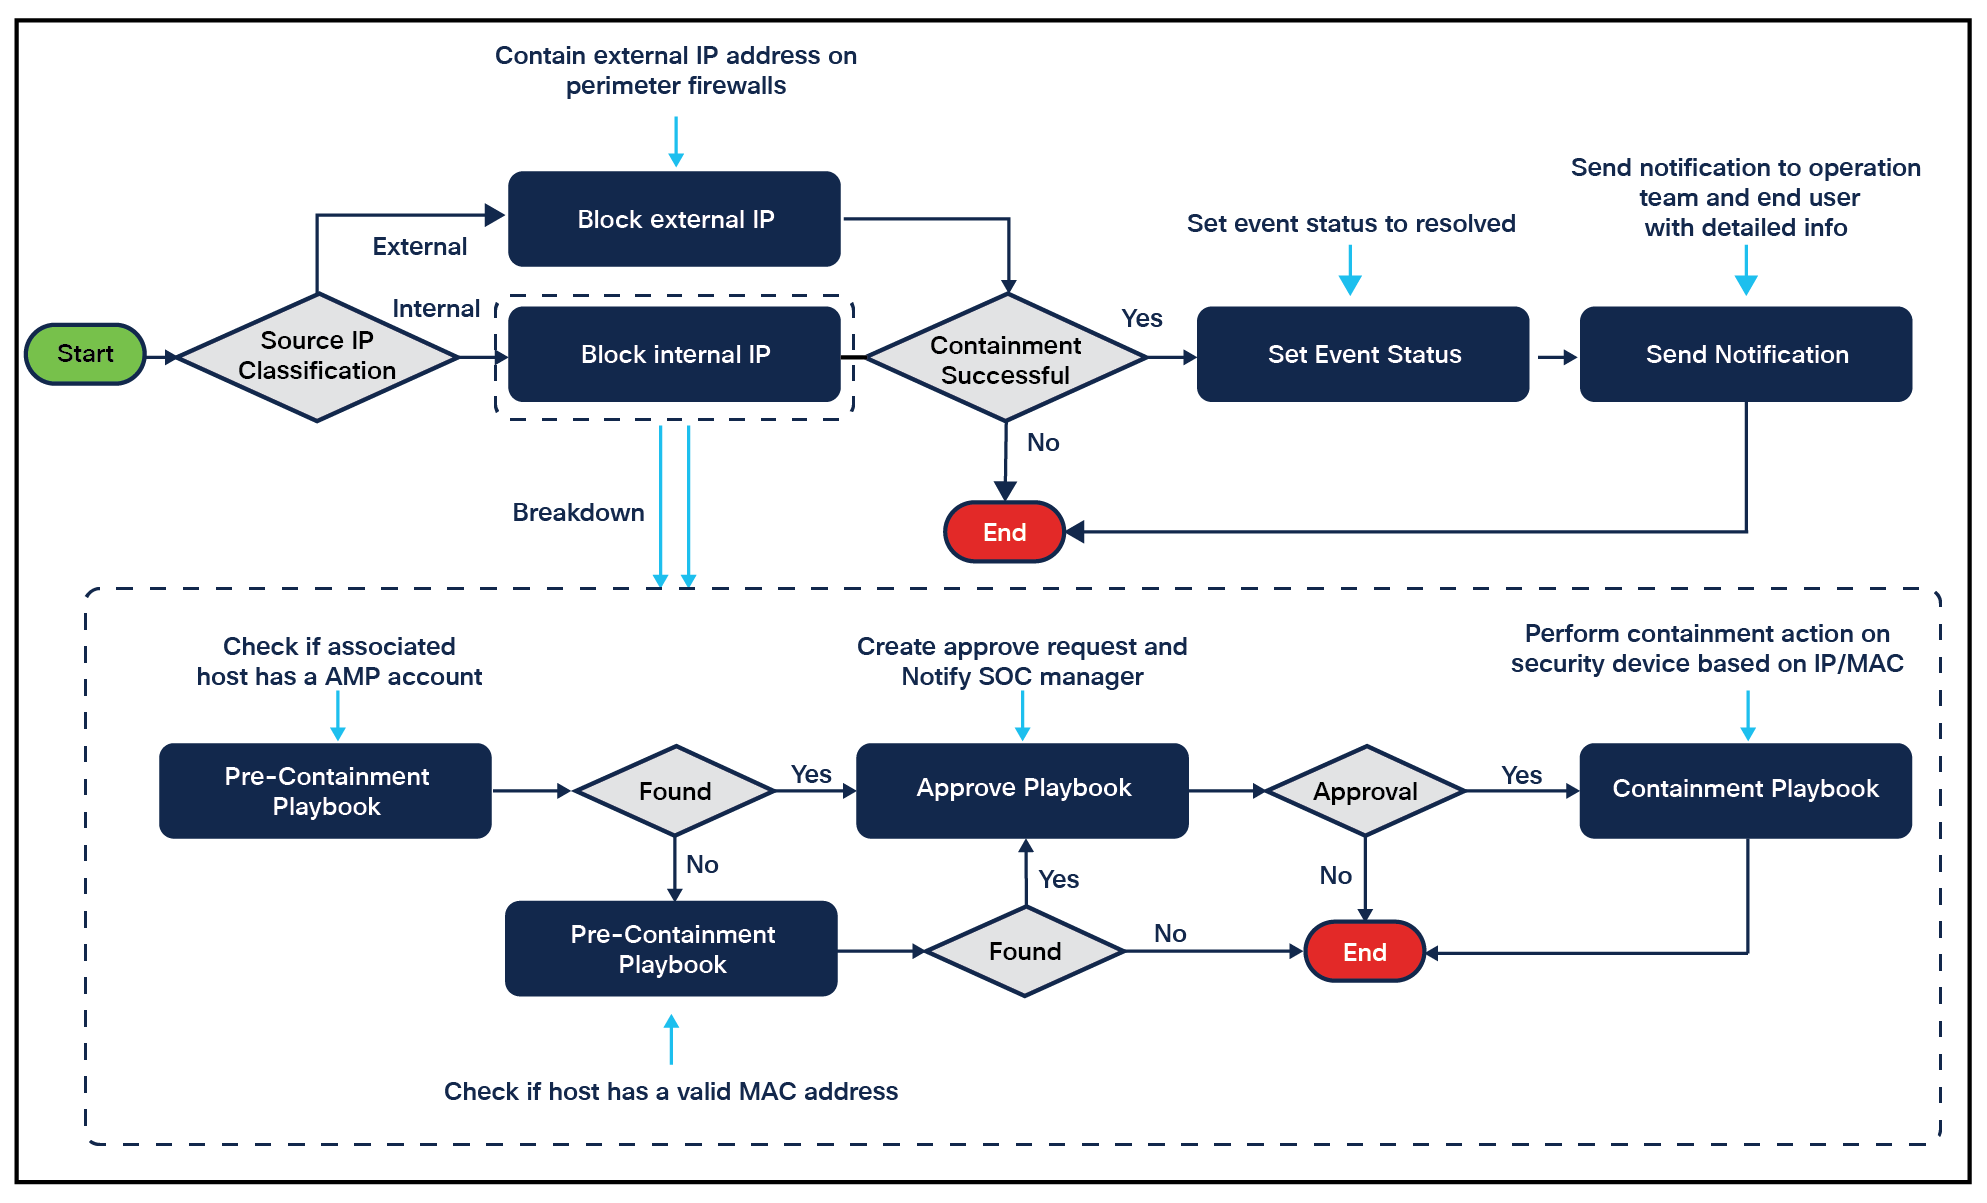 Containment workflow and breakdown